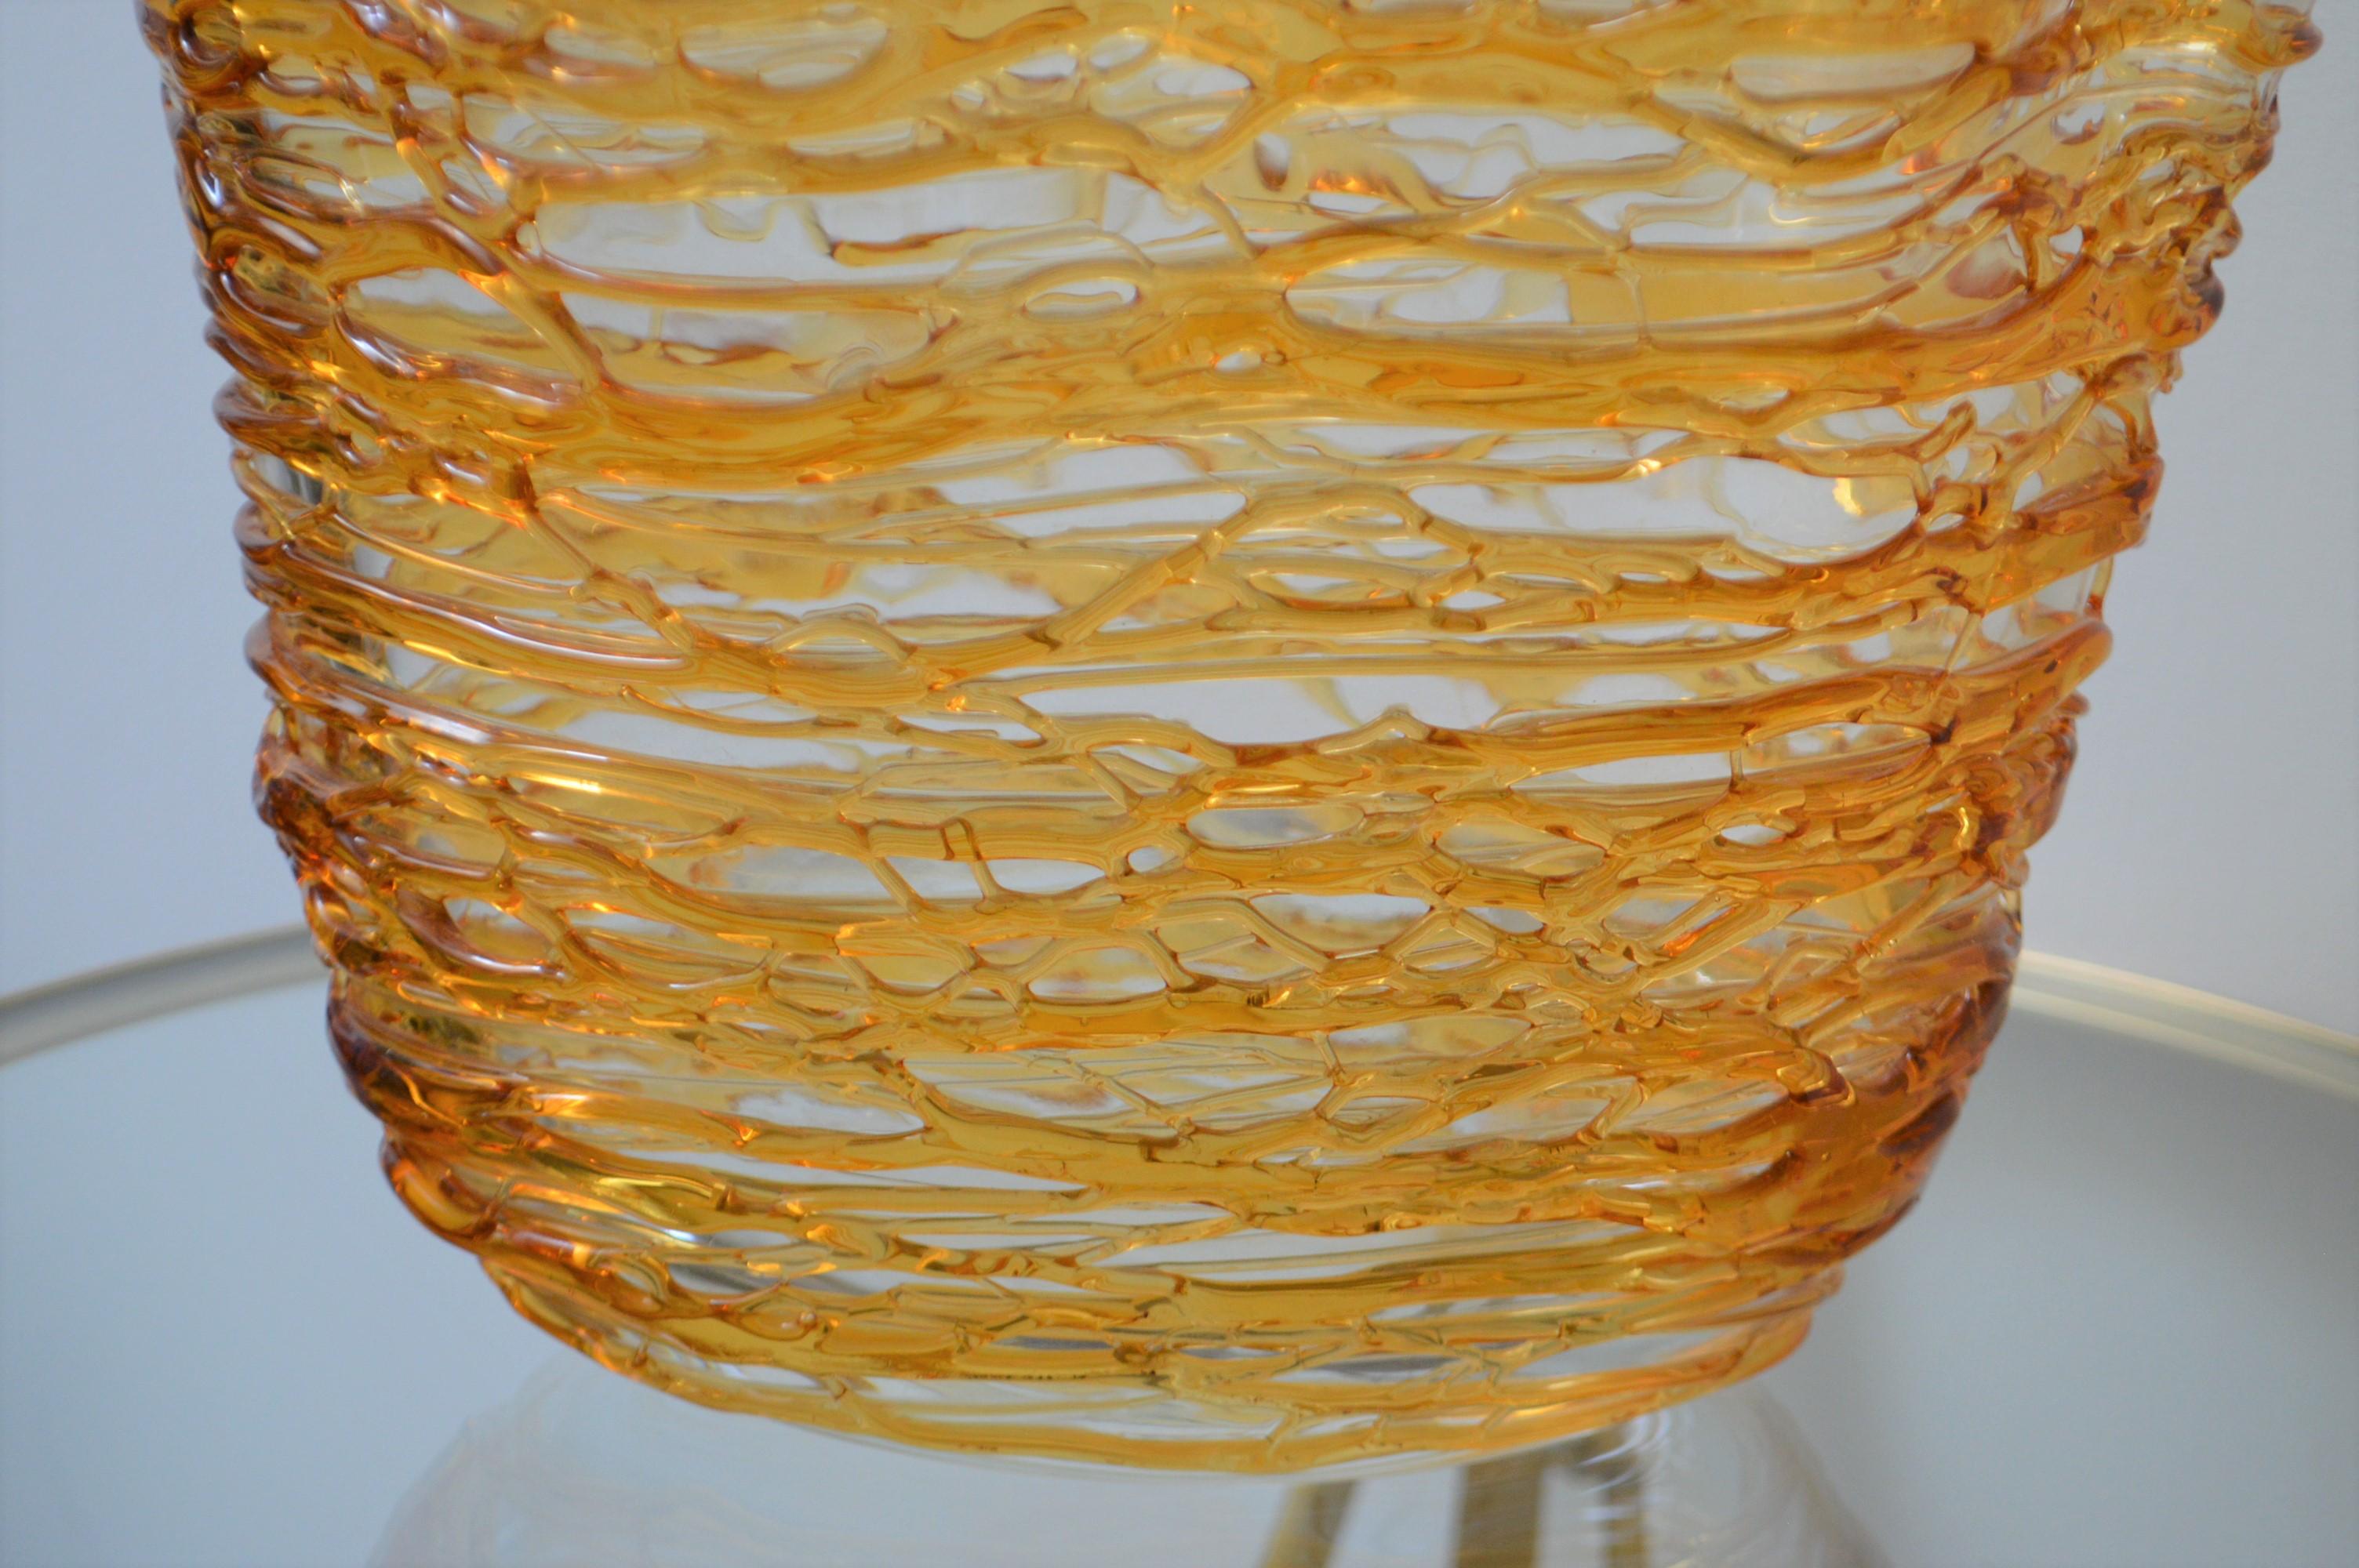 Hand-Crafted Hand Blown Decorative Murano Gold Glass Vase with a Lace Design